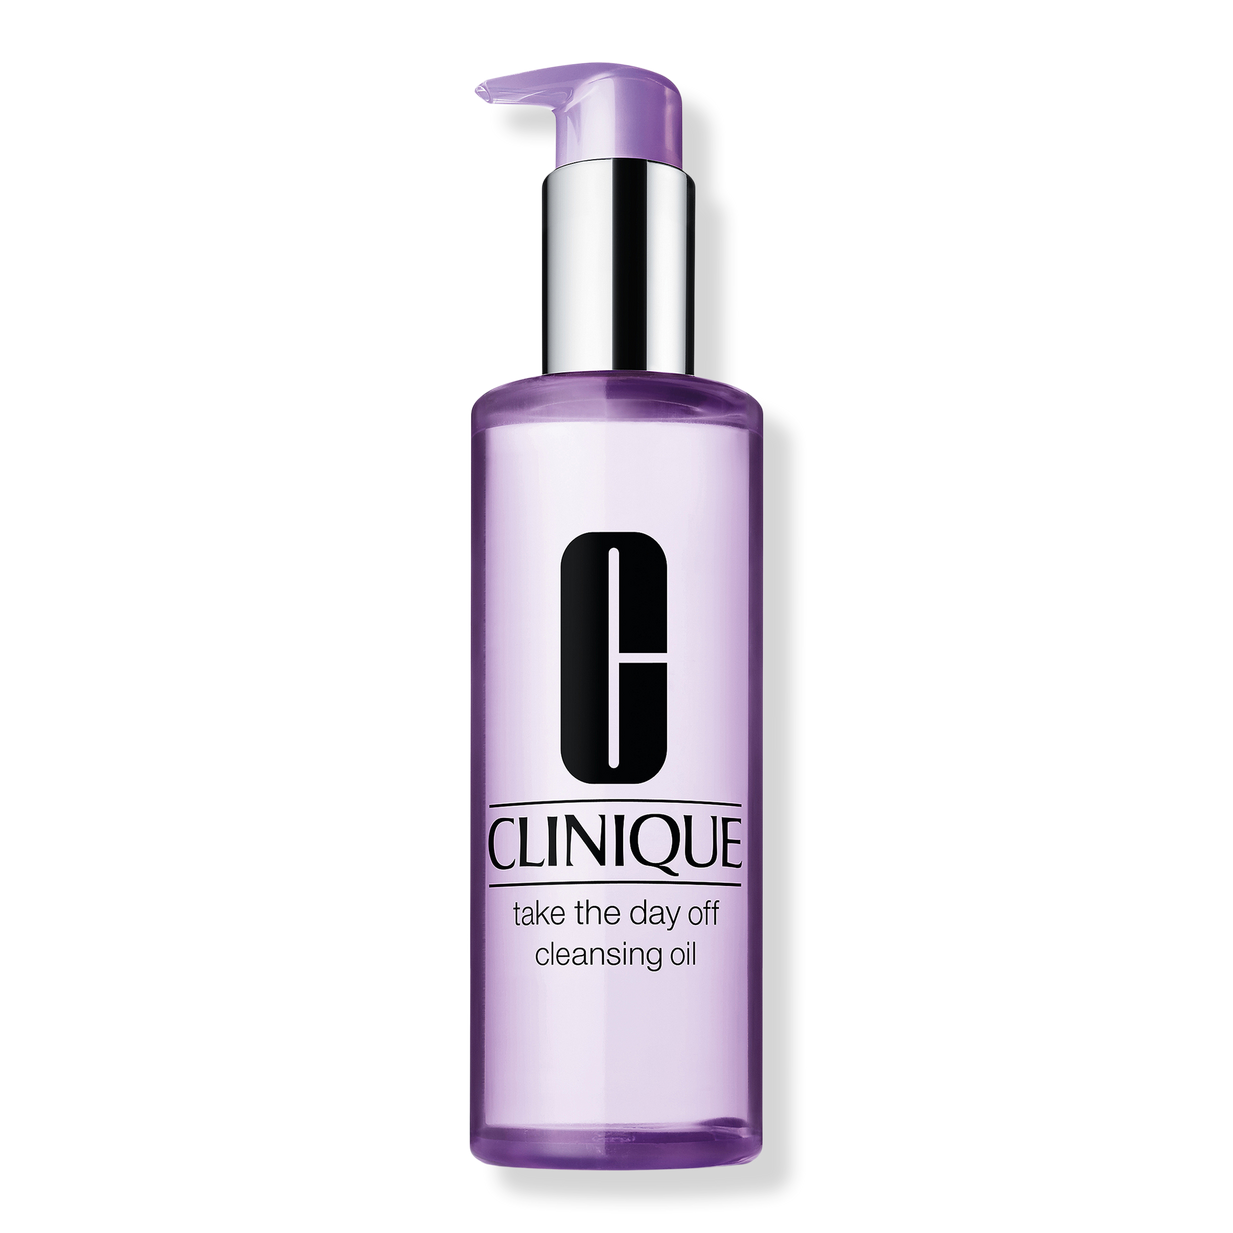 Achtervolging Rodeo Decoderen Take The Day Off Cleansing Oil Makeup Remover - Clinique | Ulta Beauty